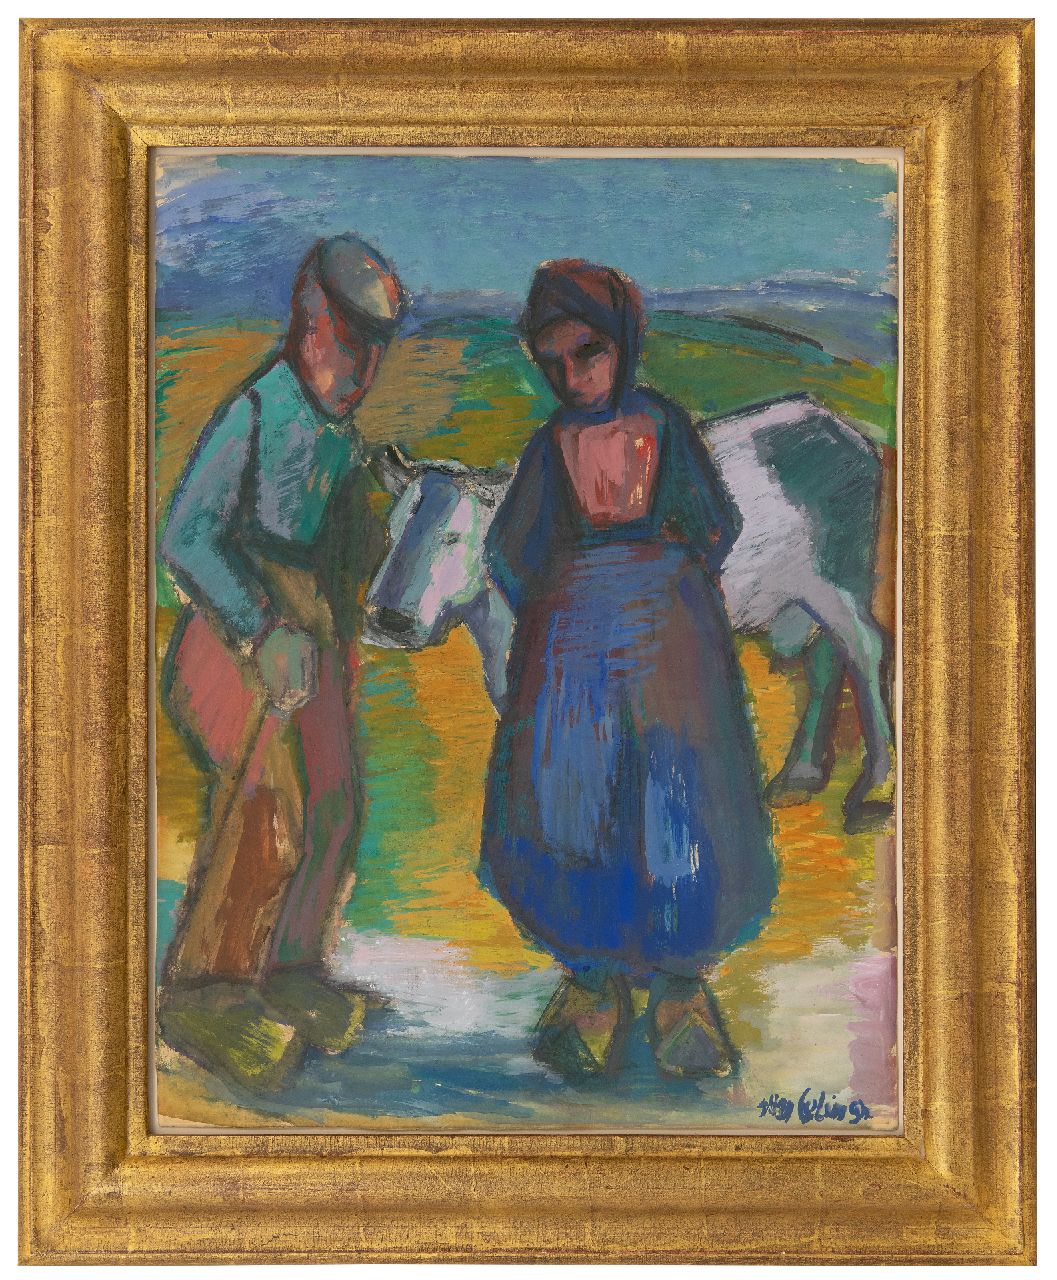 Eelsingh C.  | Christiana 'Stien' Eelsingh, A farmer's couple with a cow, gouache on paper 63.0 x 48.3 cm, signed l.r. and painted ca. 1950-1055